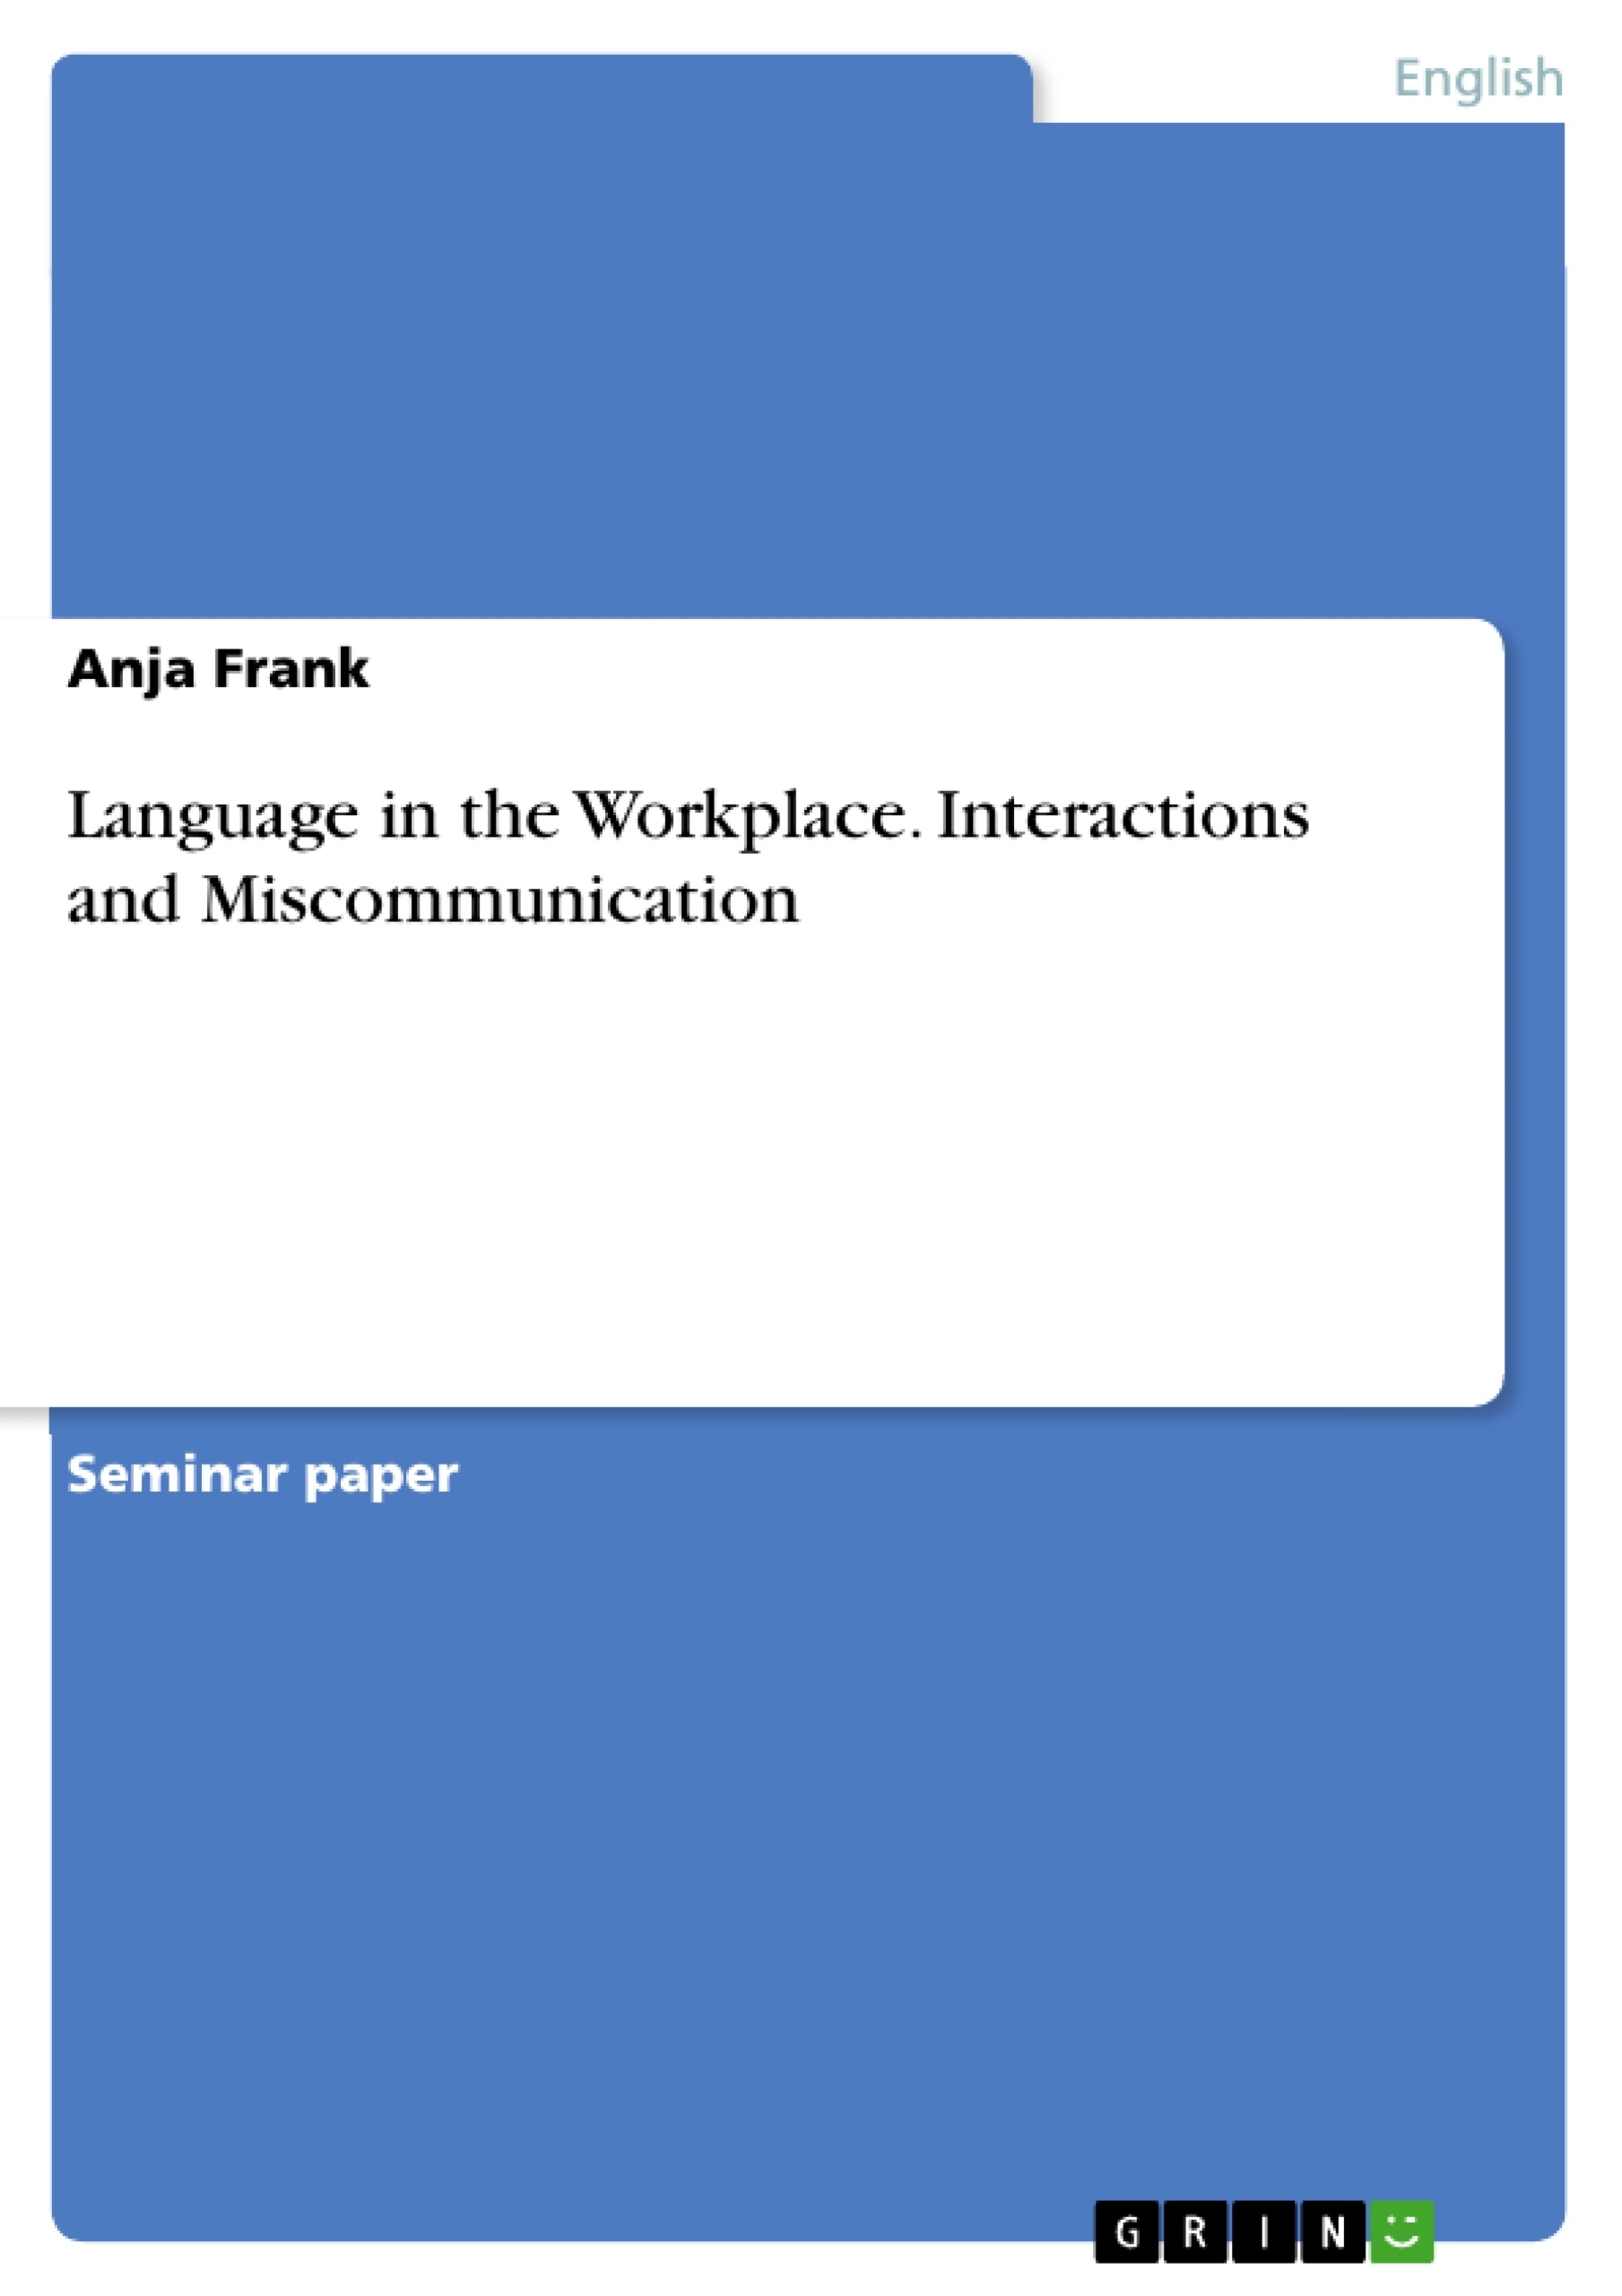 Título: Language in the Workplace. Interactions and Miscommunication